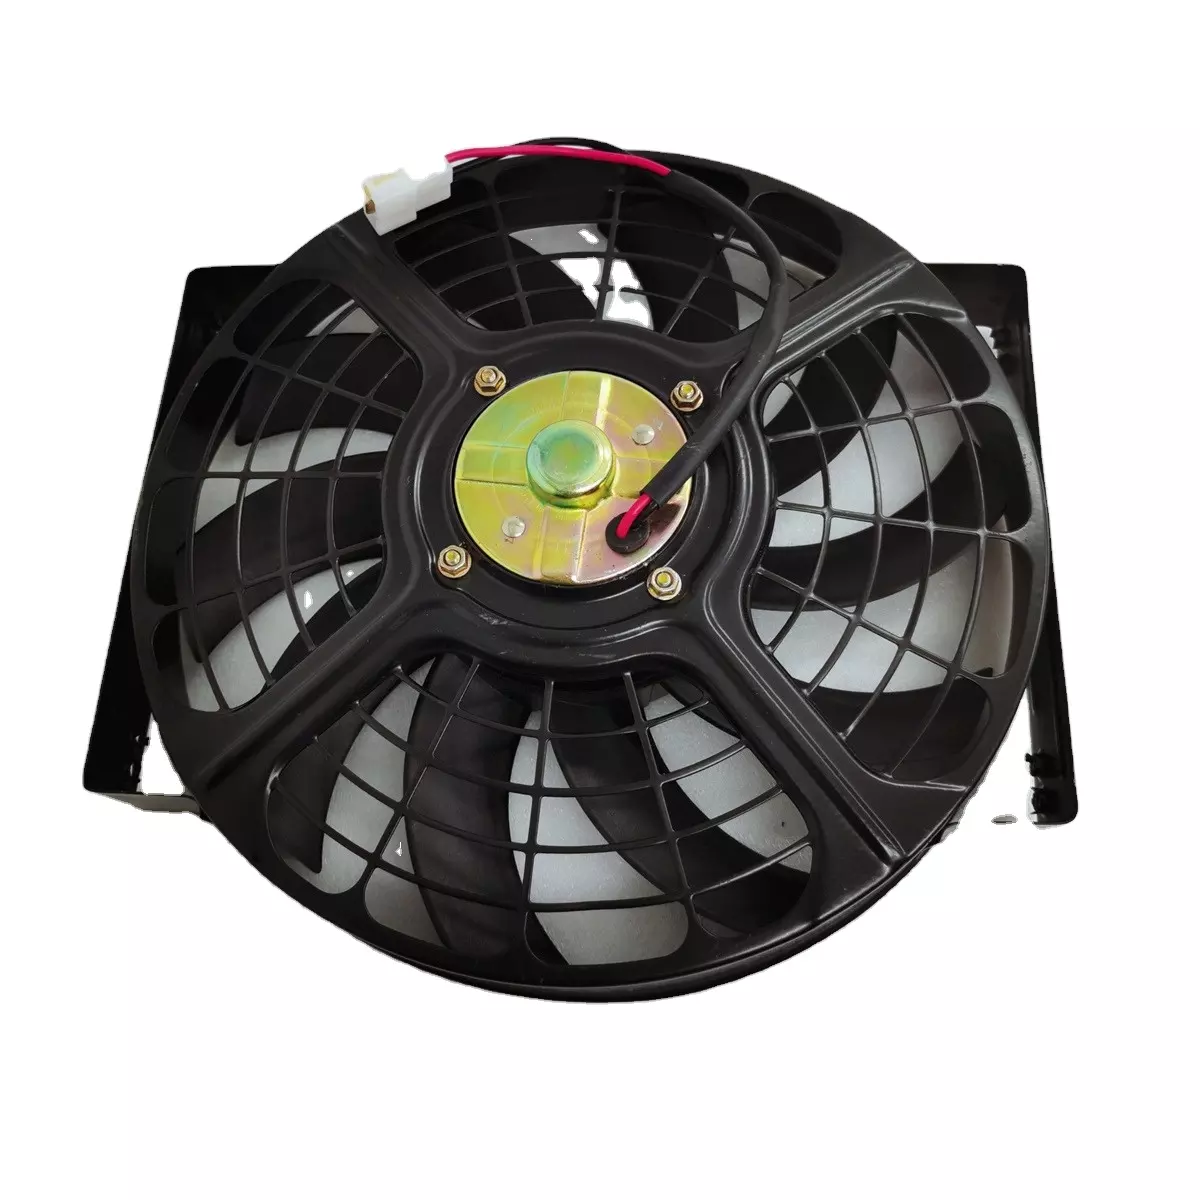 Low Price factory direct sale Aluminum Hard Motorcycle China tricycle Radiator fan